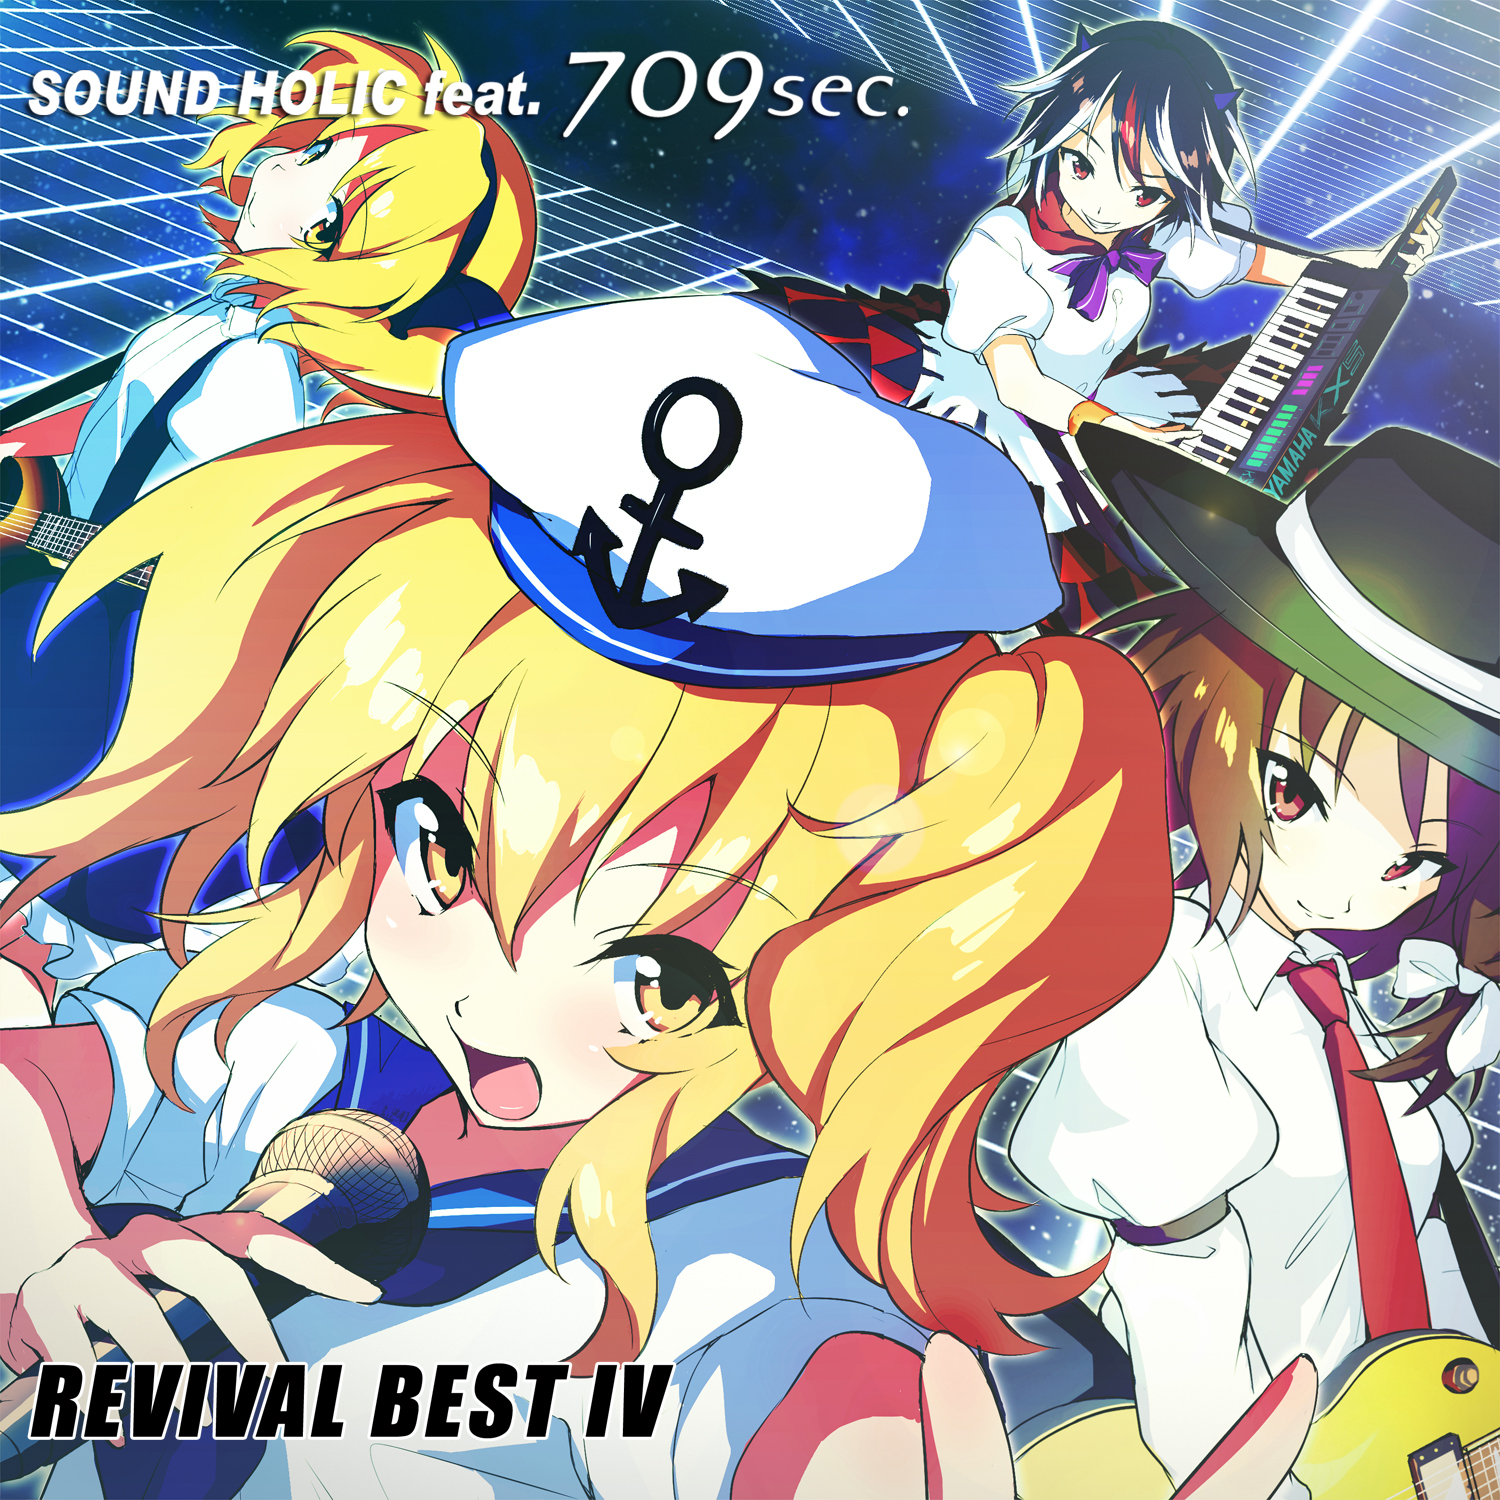 SOUND HOLIC feat. 709sec. REVIVAL BEST IV